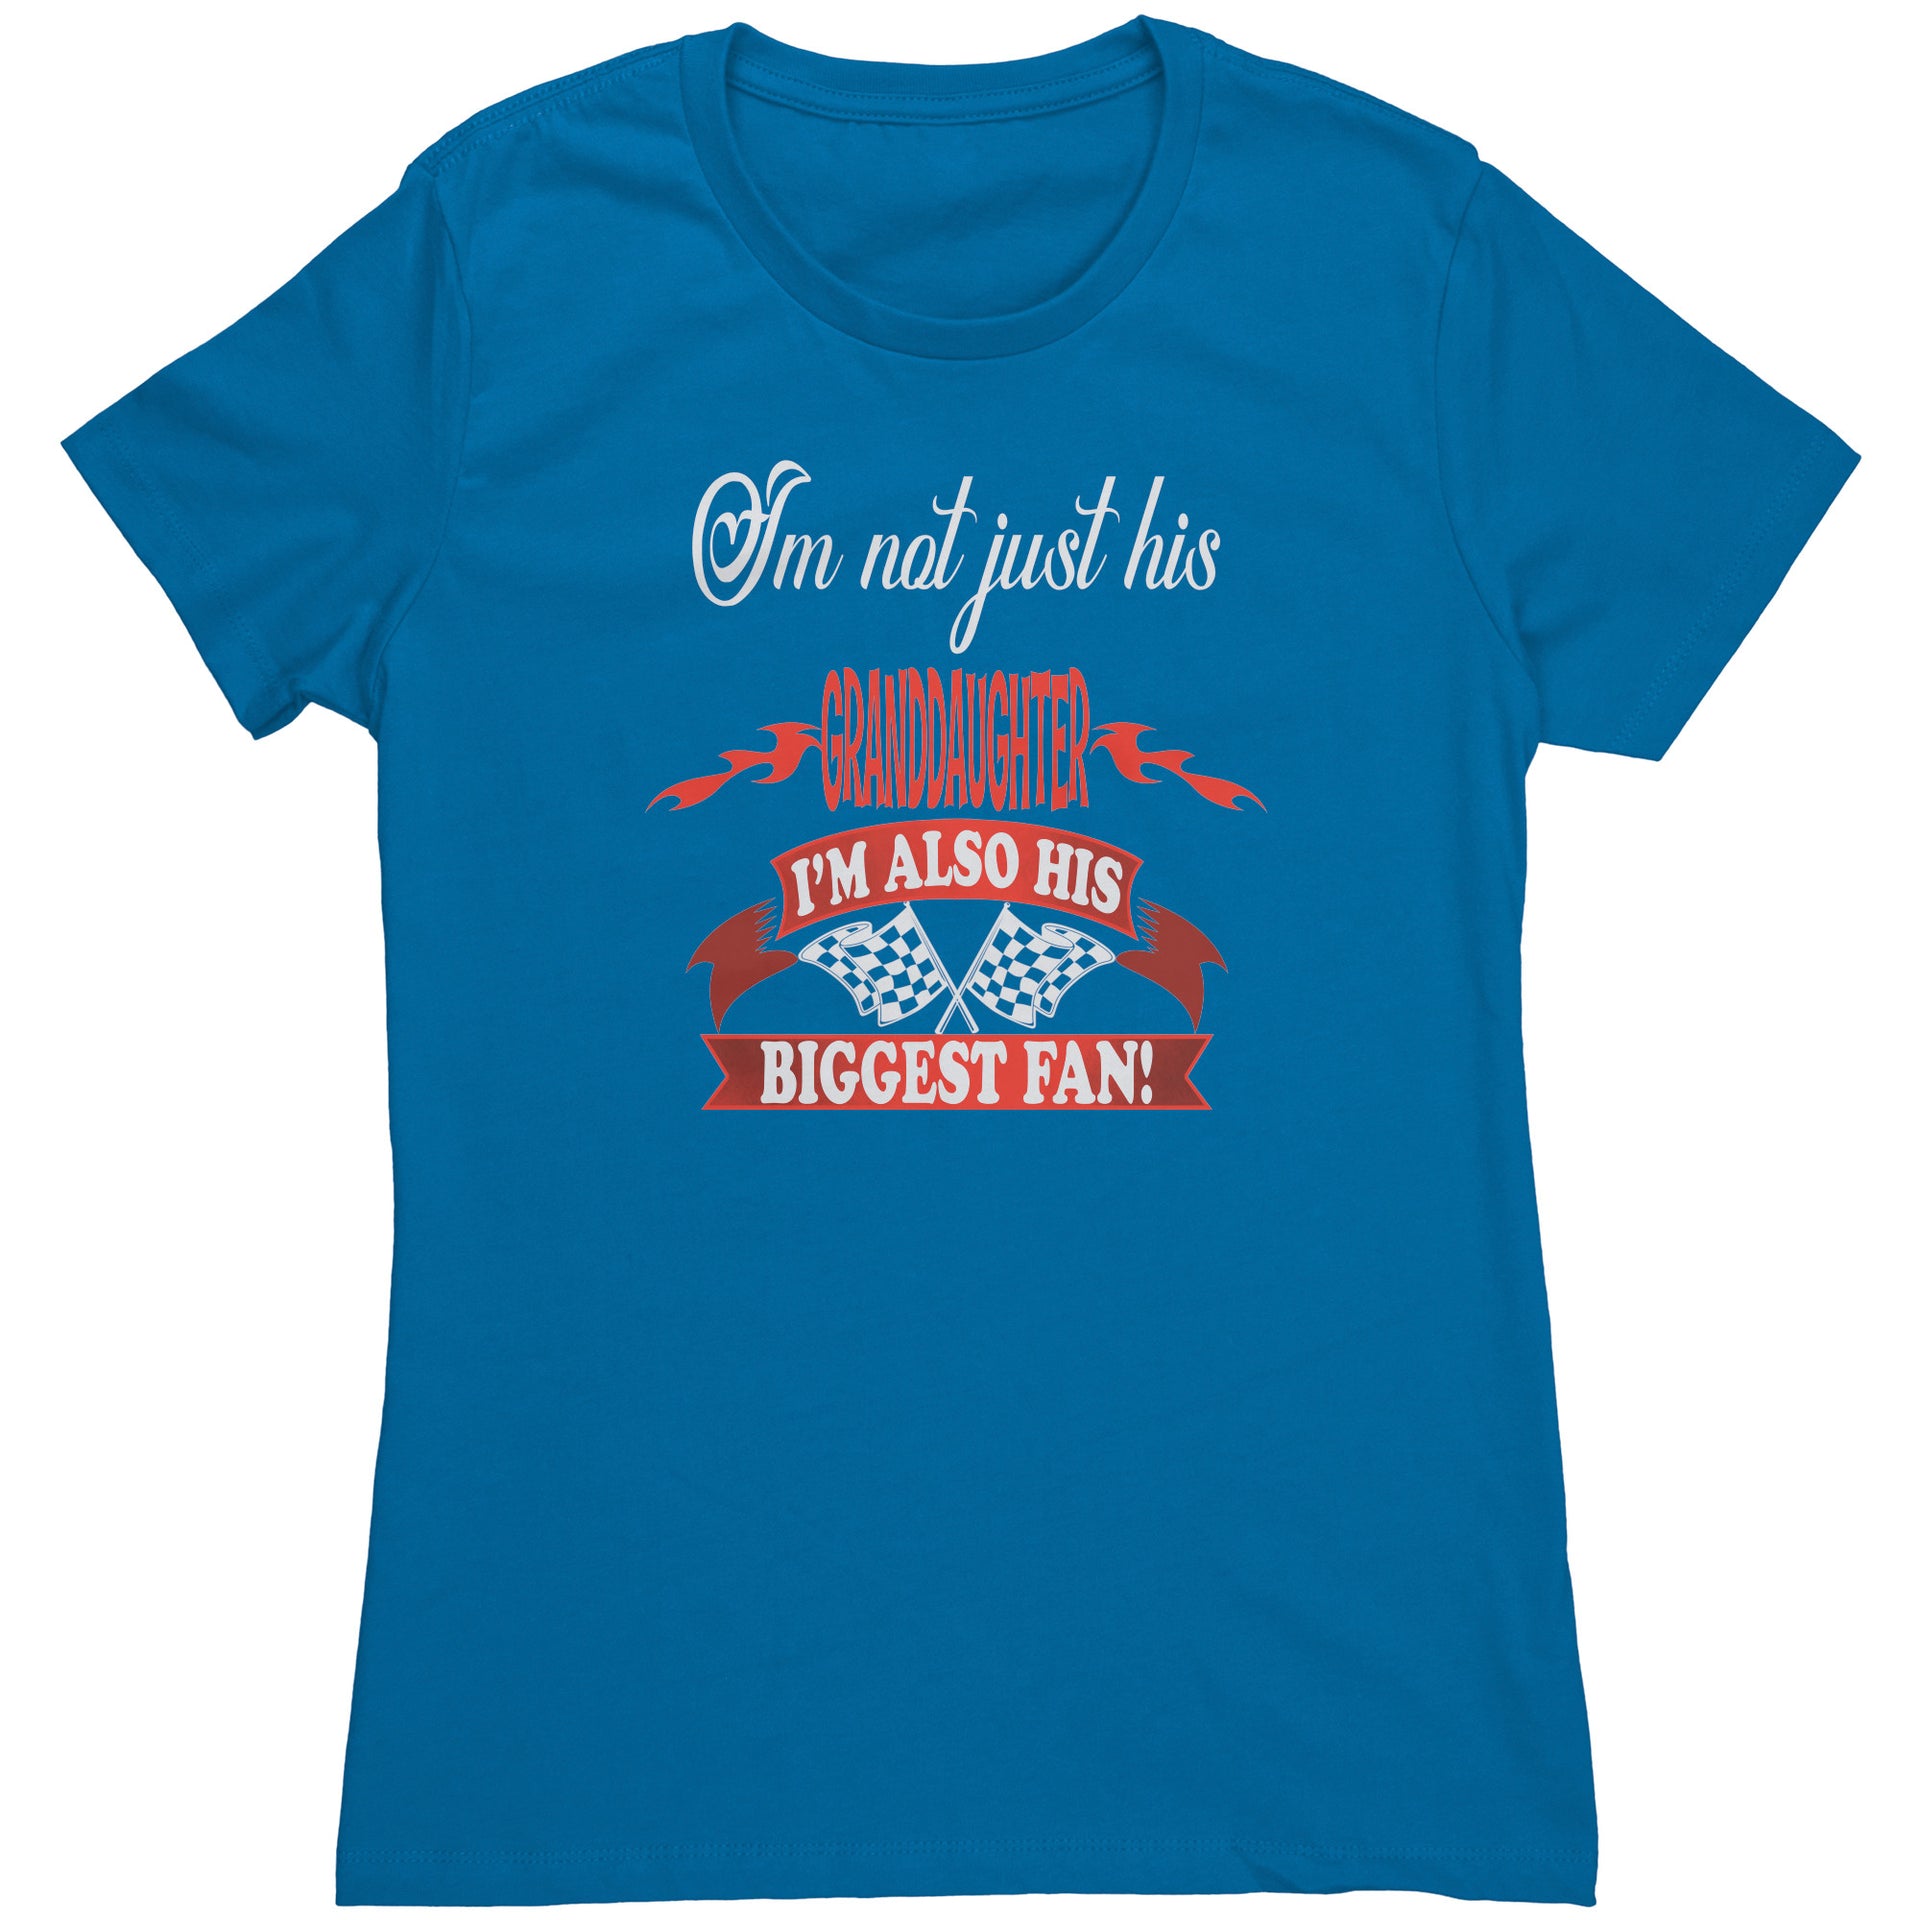 I'm Not just His Granddaughter T-Shirts